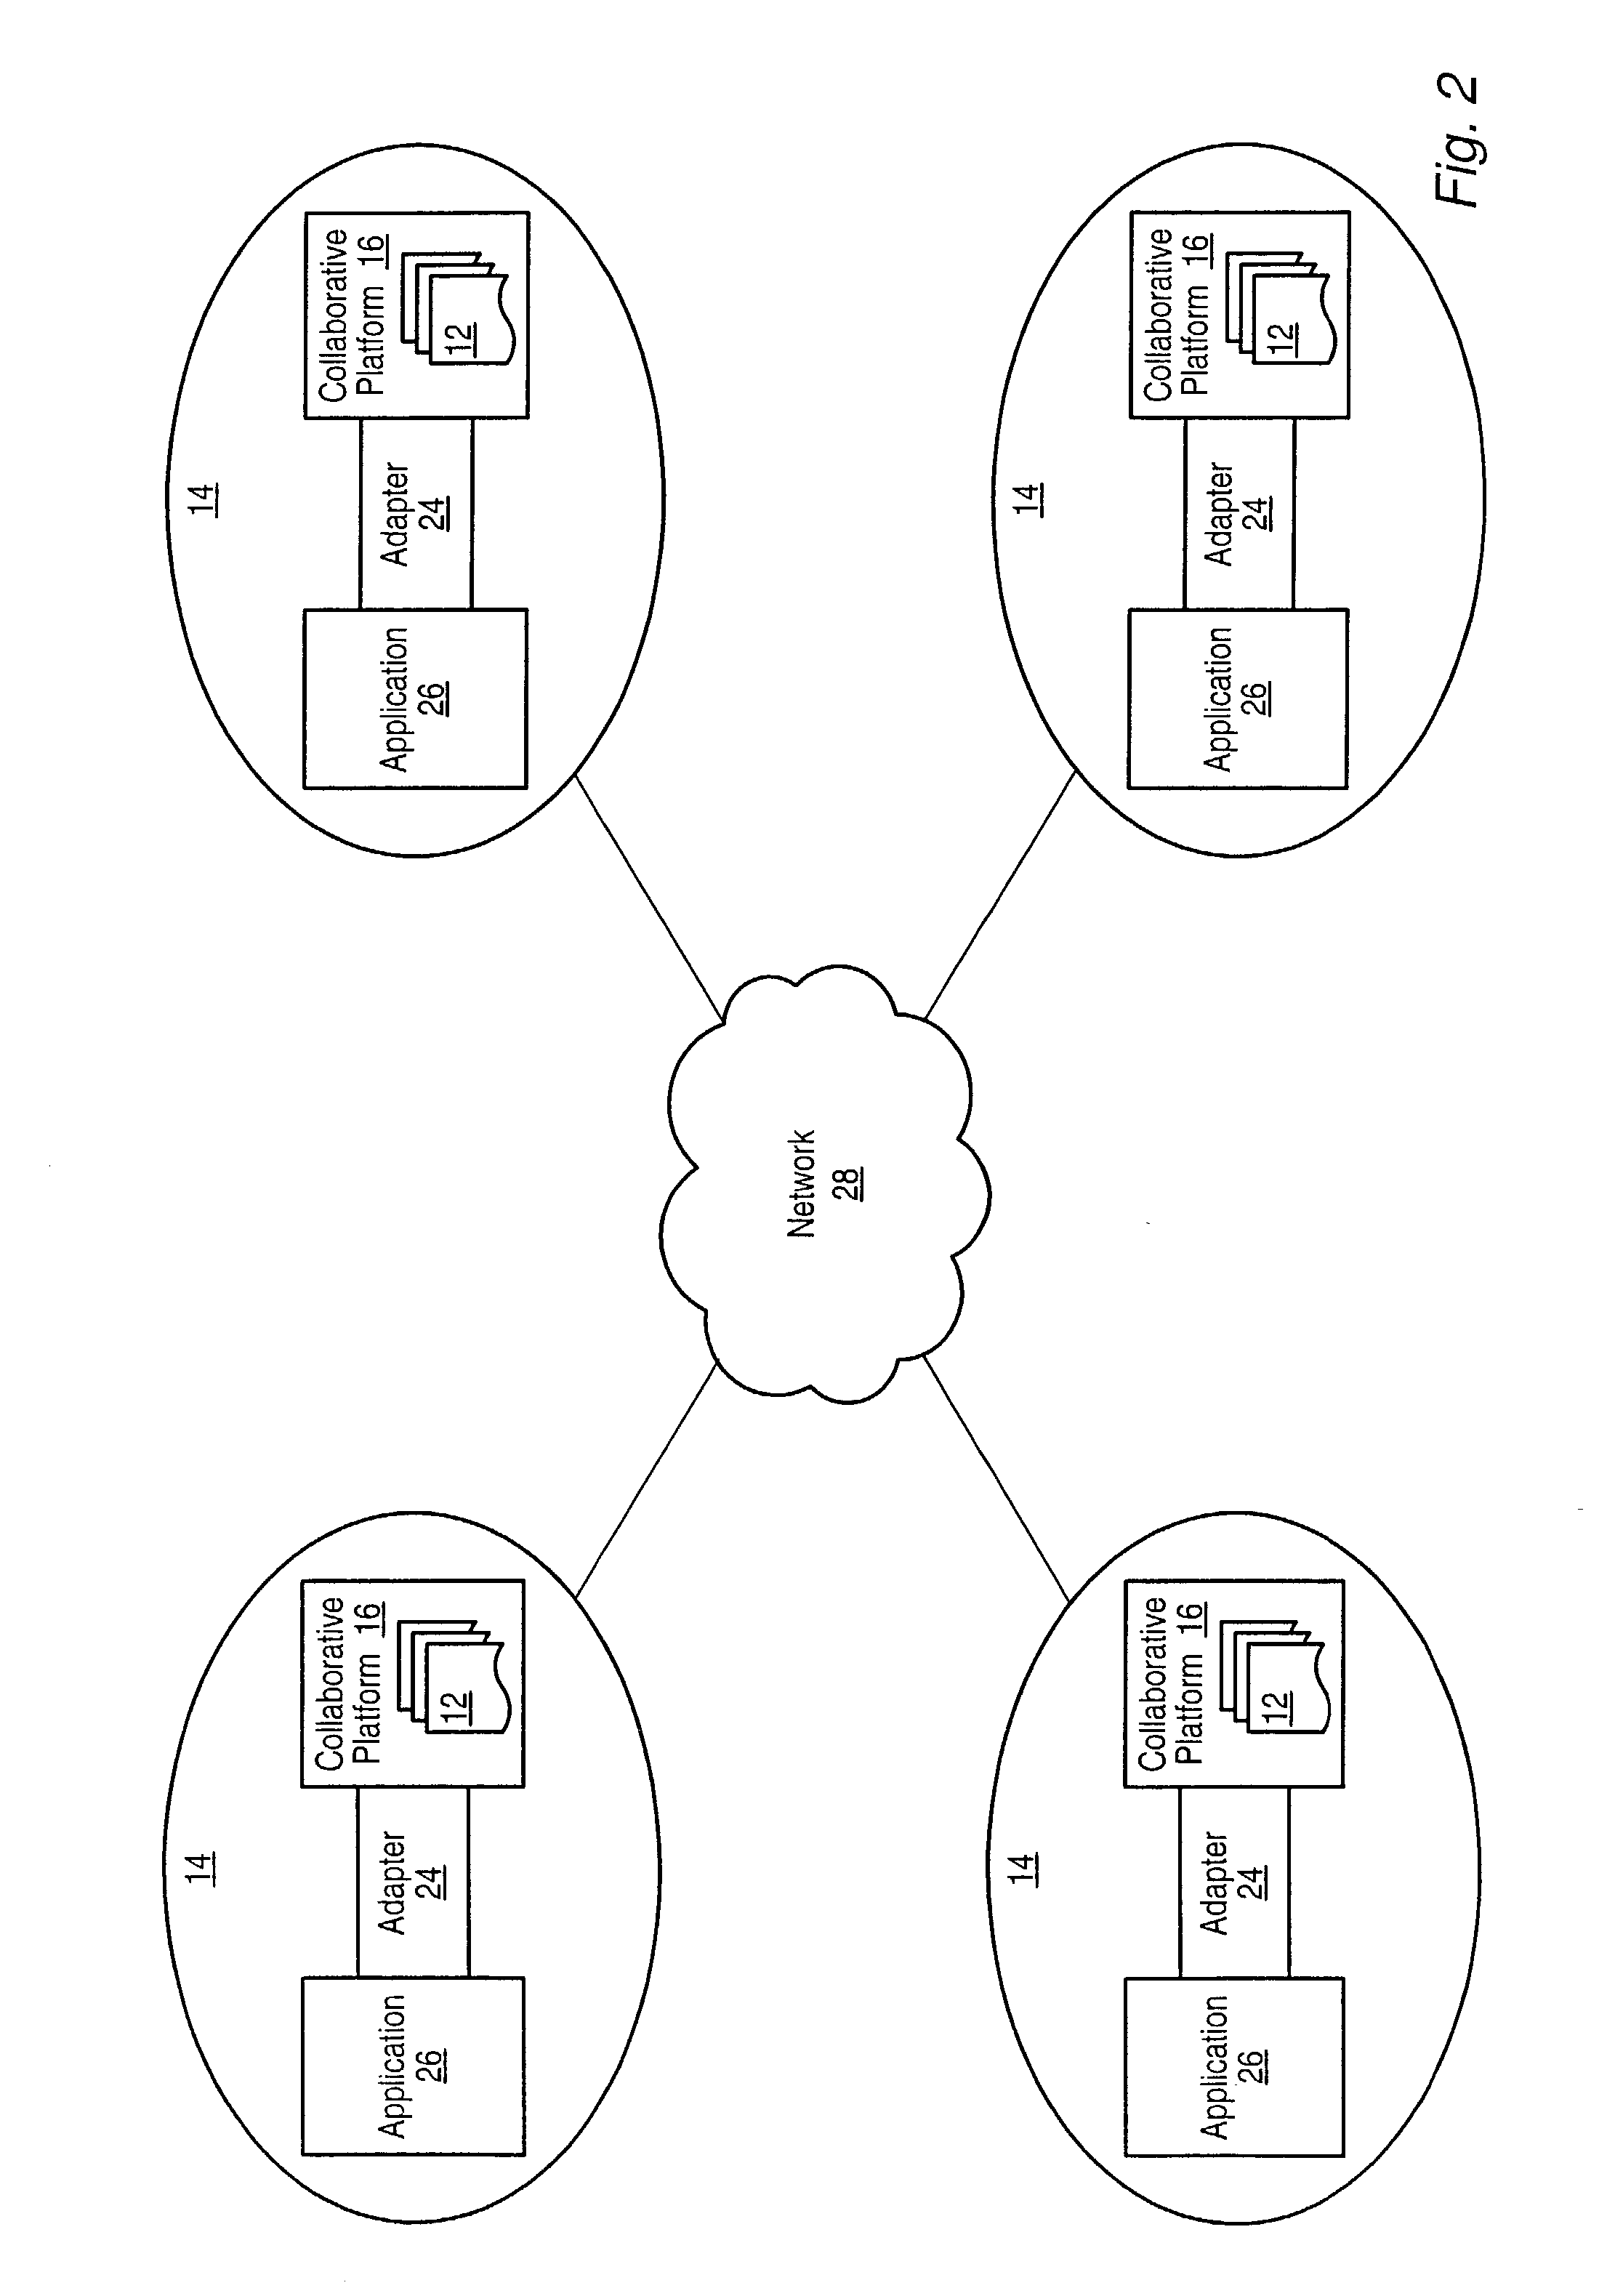 System and method for collaborative data resource representation